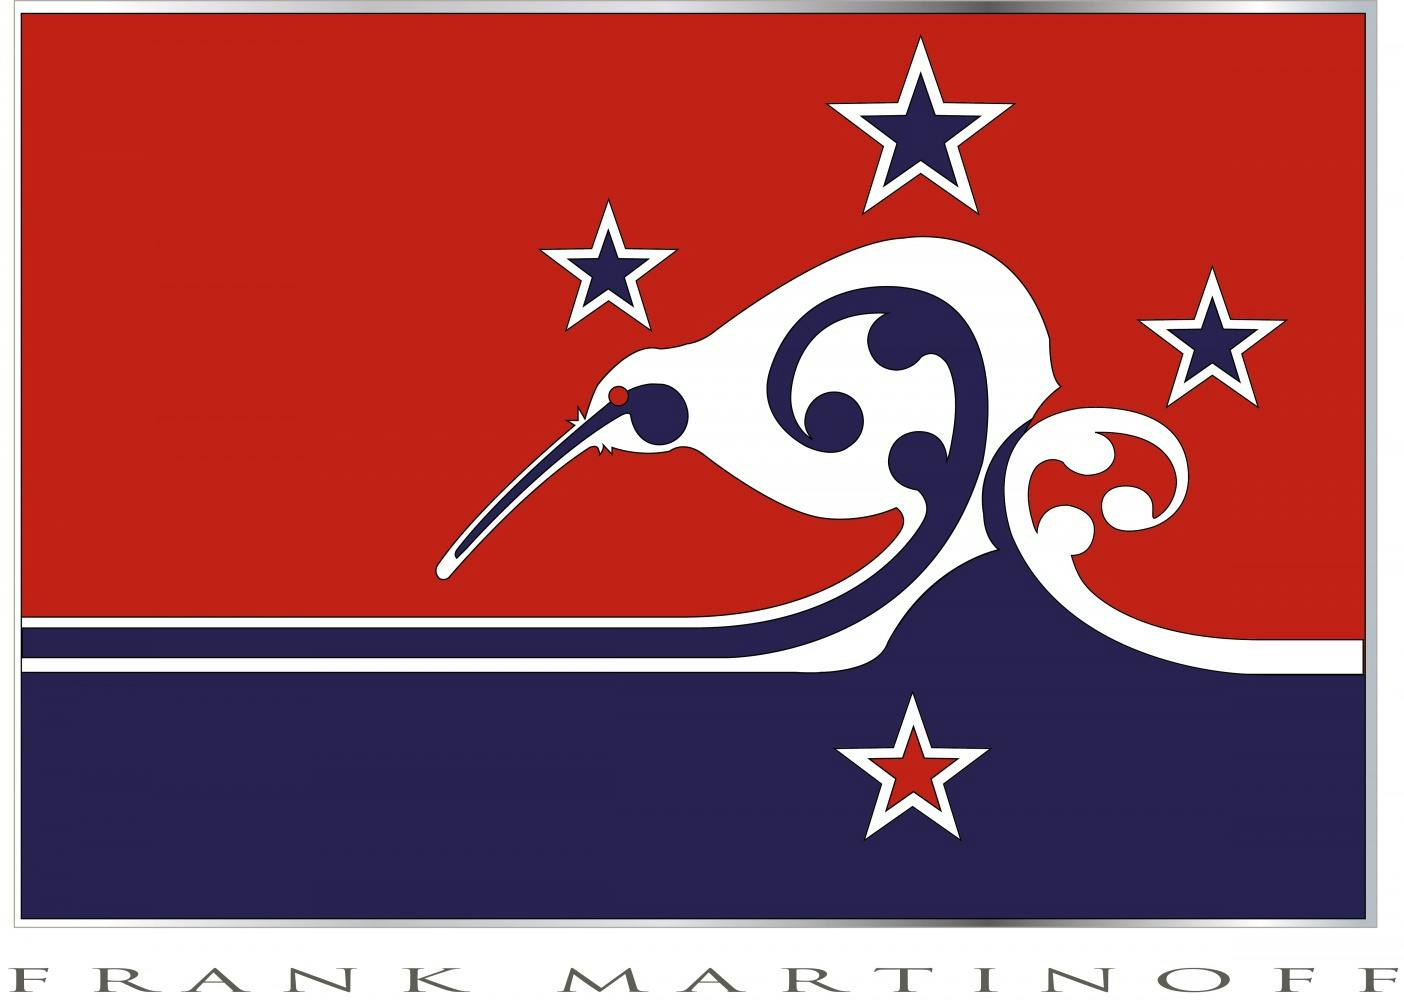 "NZ 1 Tribal Kiwi - Waves representing Islands, and the southern Cross Version 6"